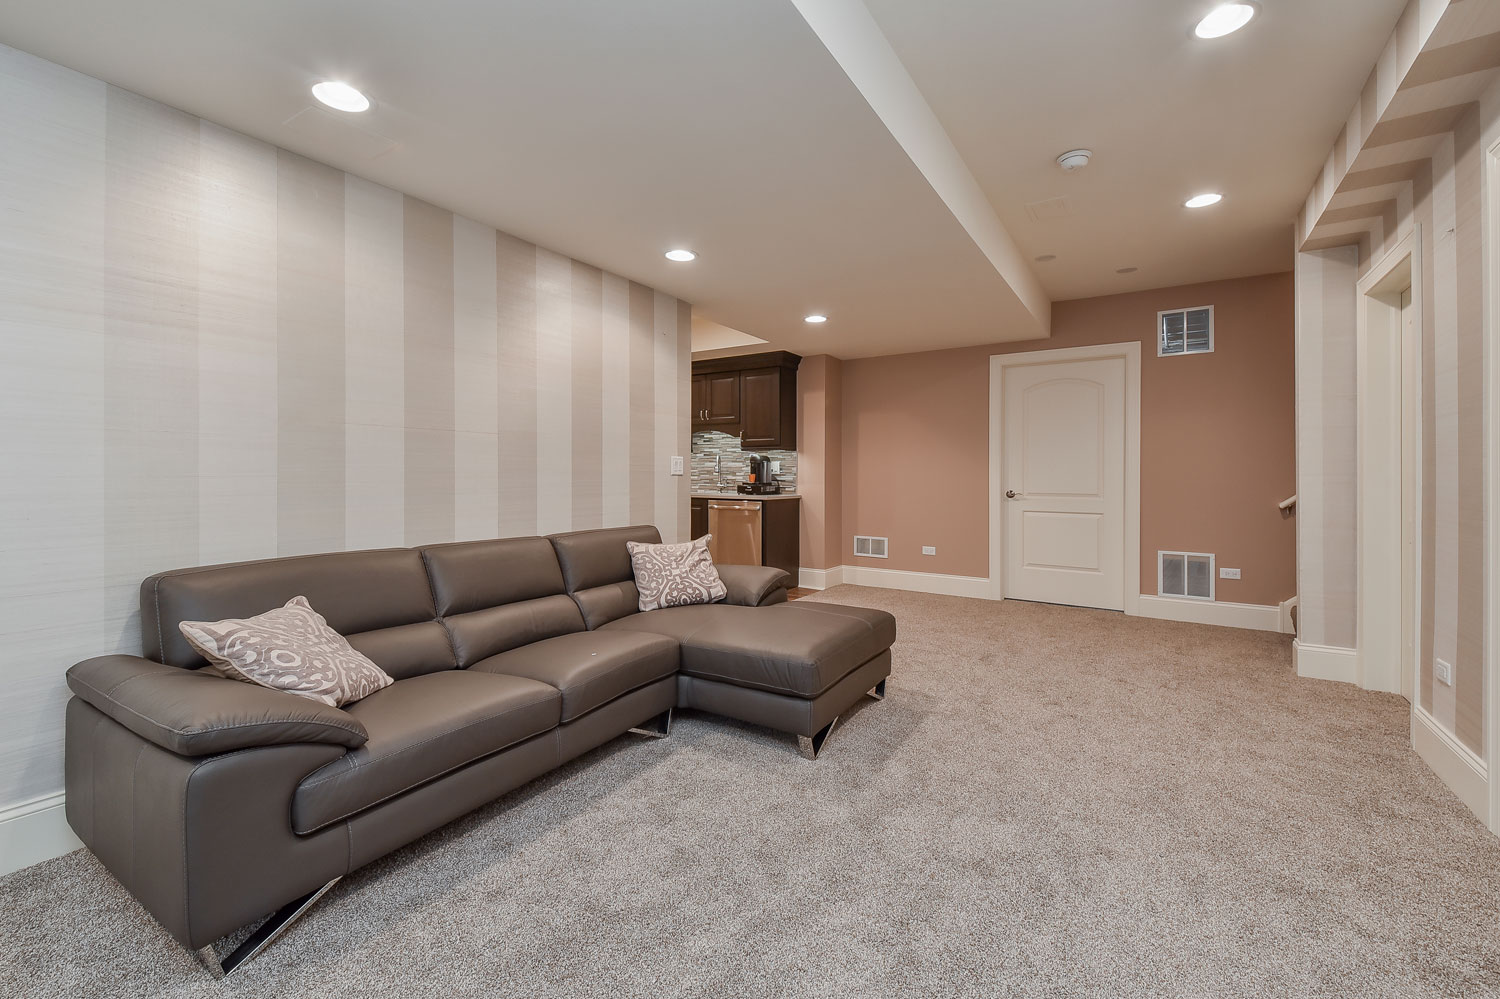 Downers Grove Basement Remodel with Sauna, Steam Shower, Office - Sebring Design Build